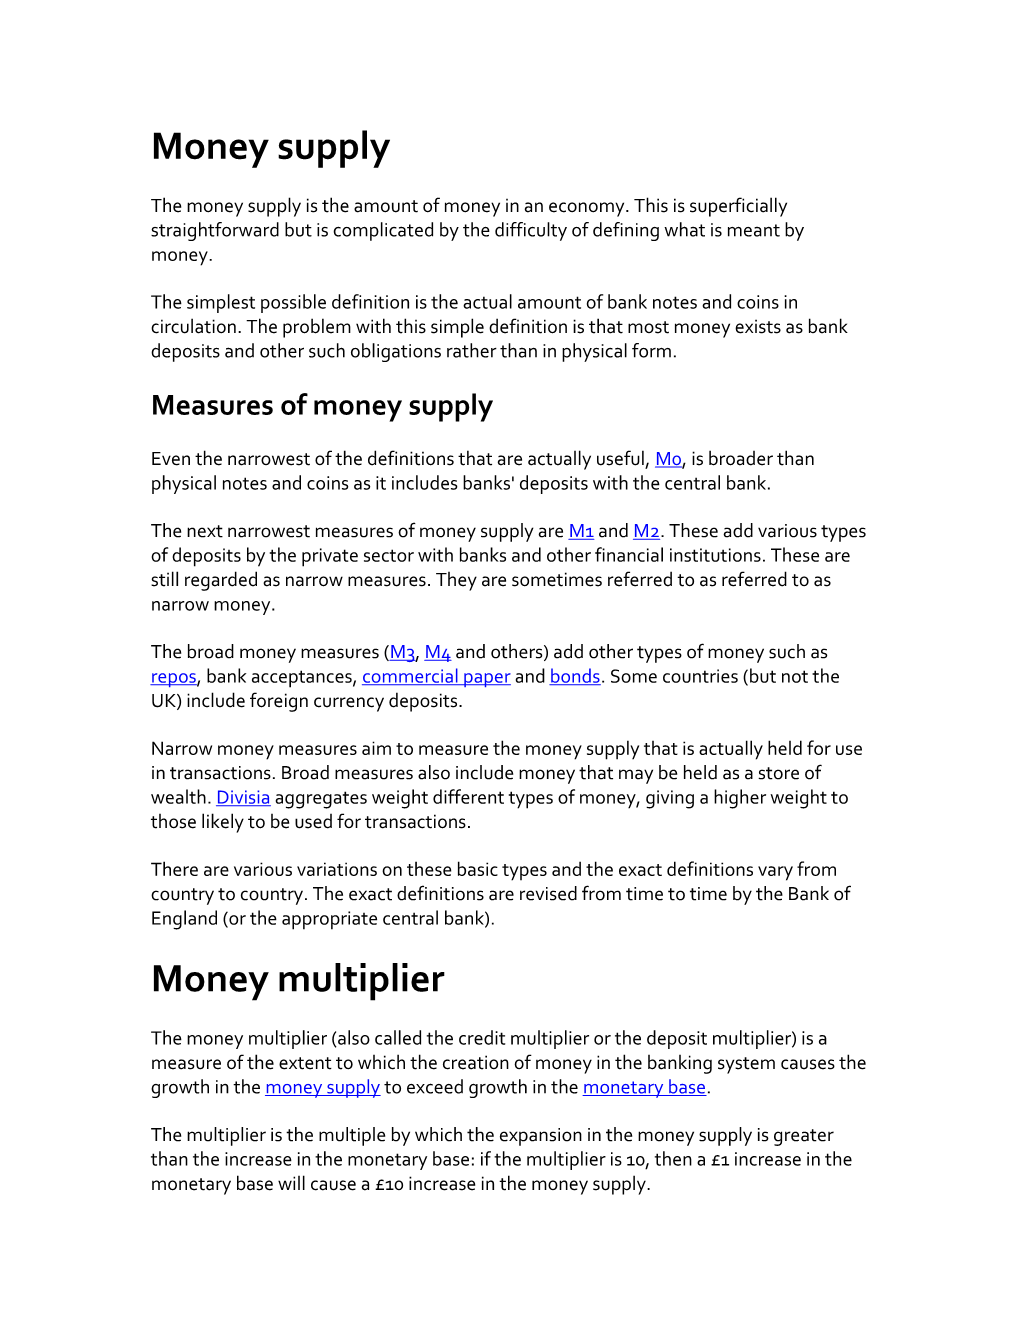 Measures of Money Supply